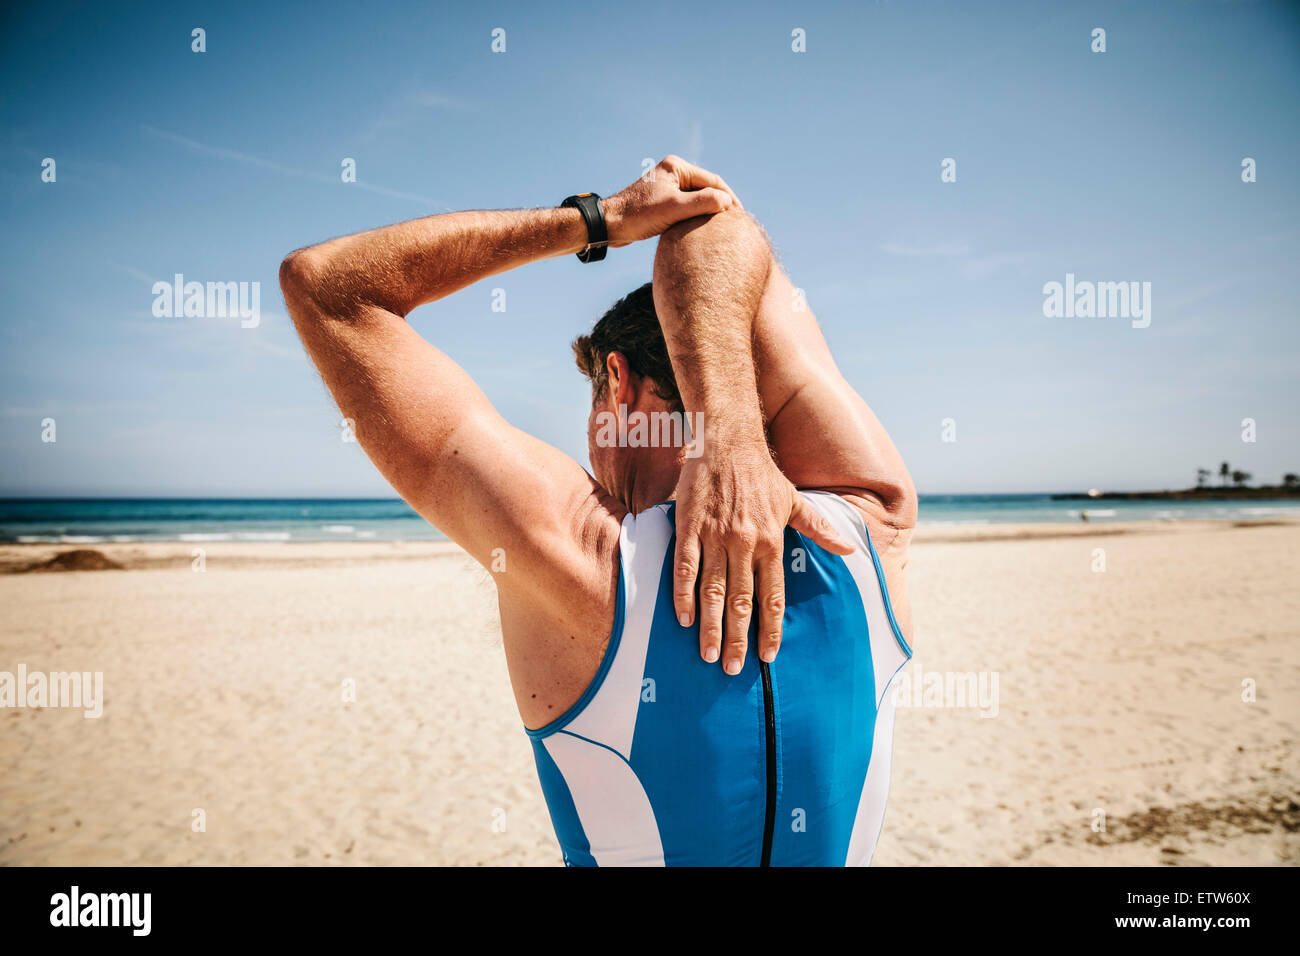 Spain, Mallorca, Sa Coma, back view of triathlet stretching on the beach Stock Photo